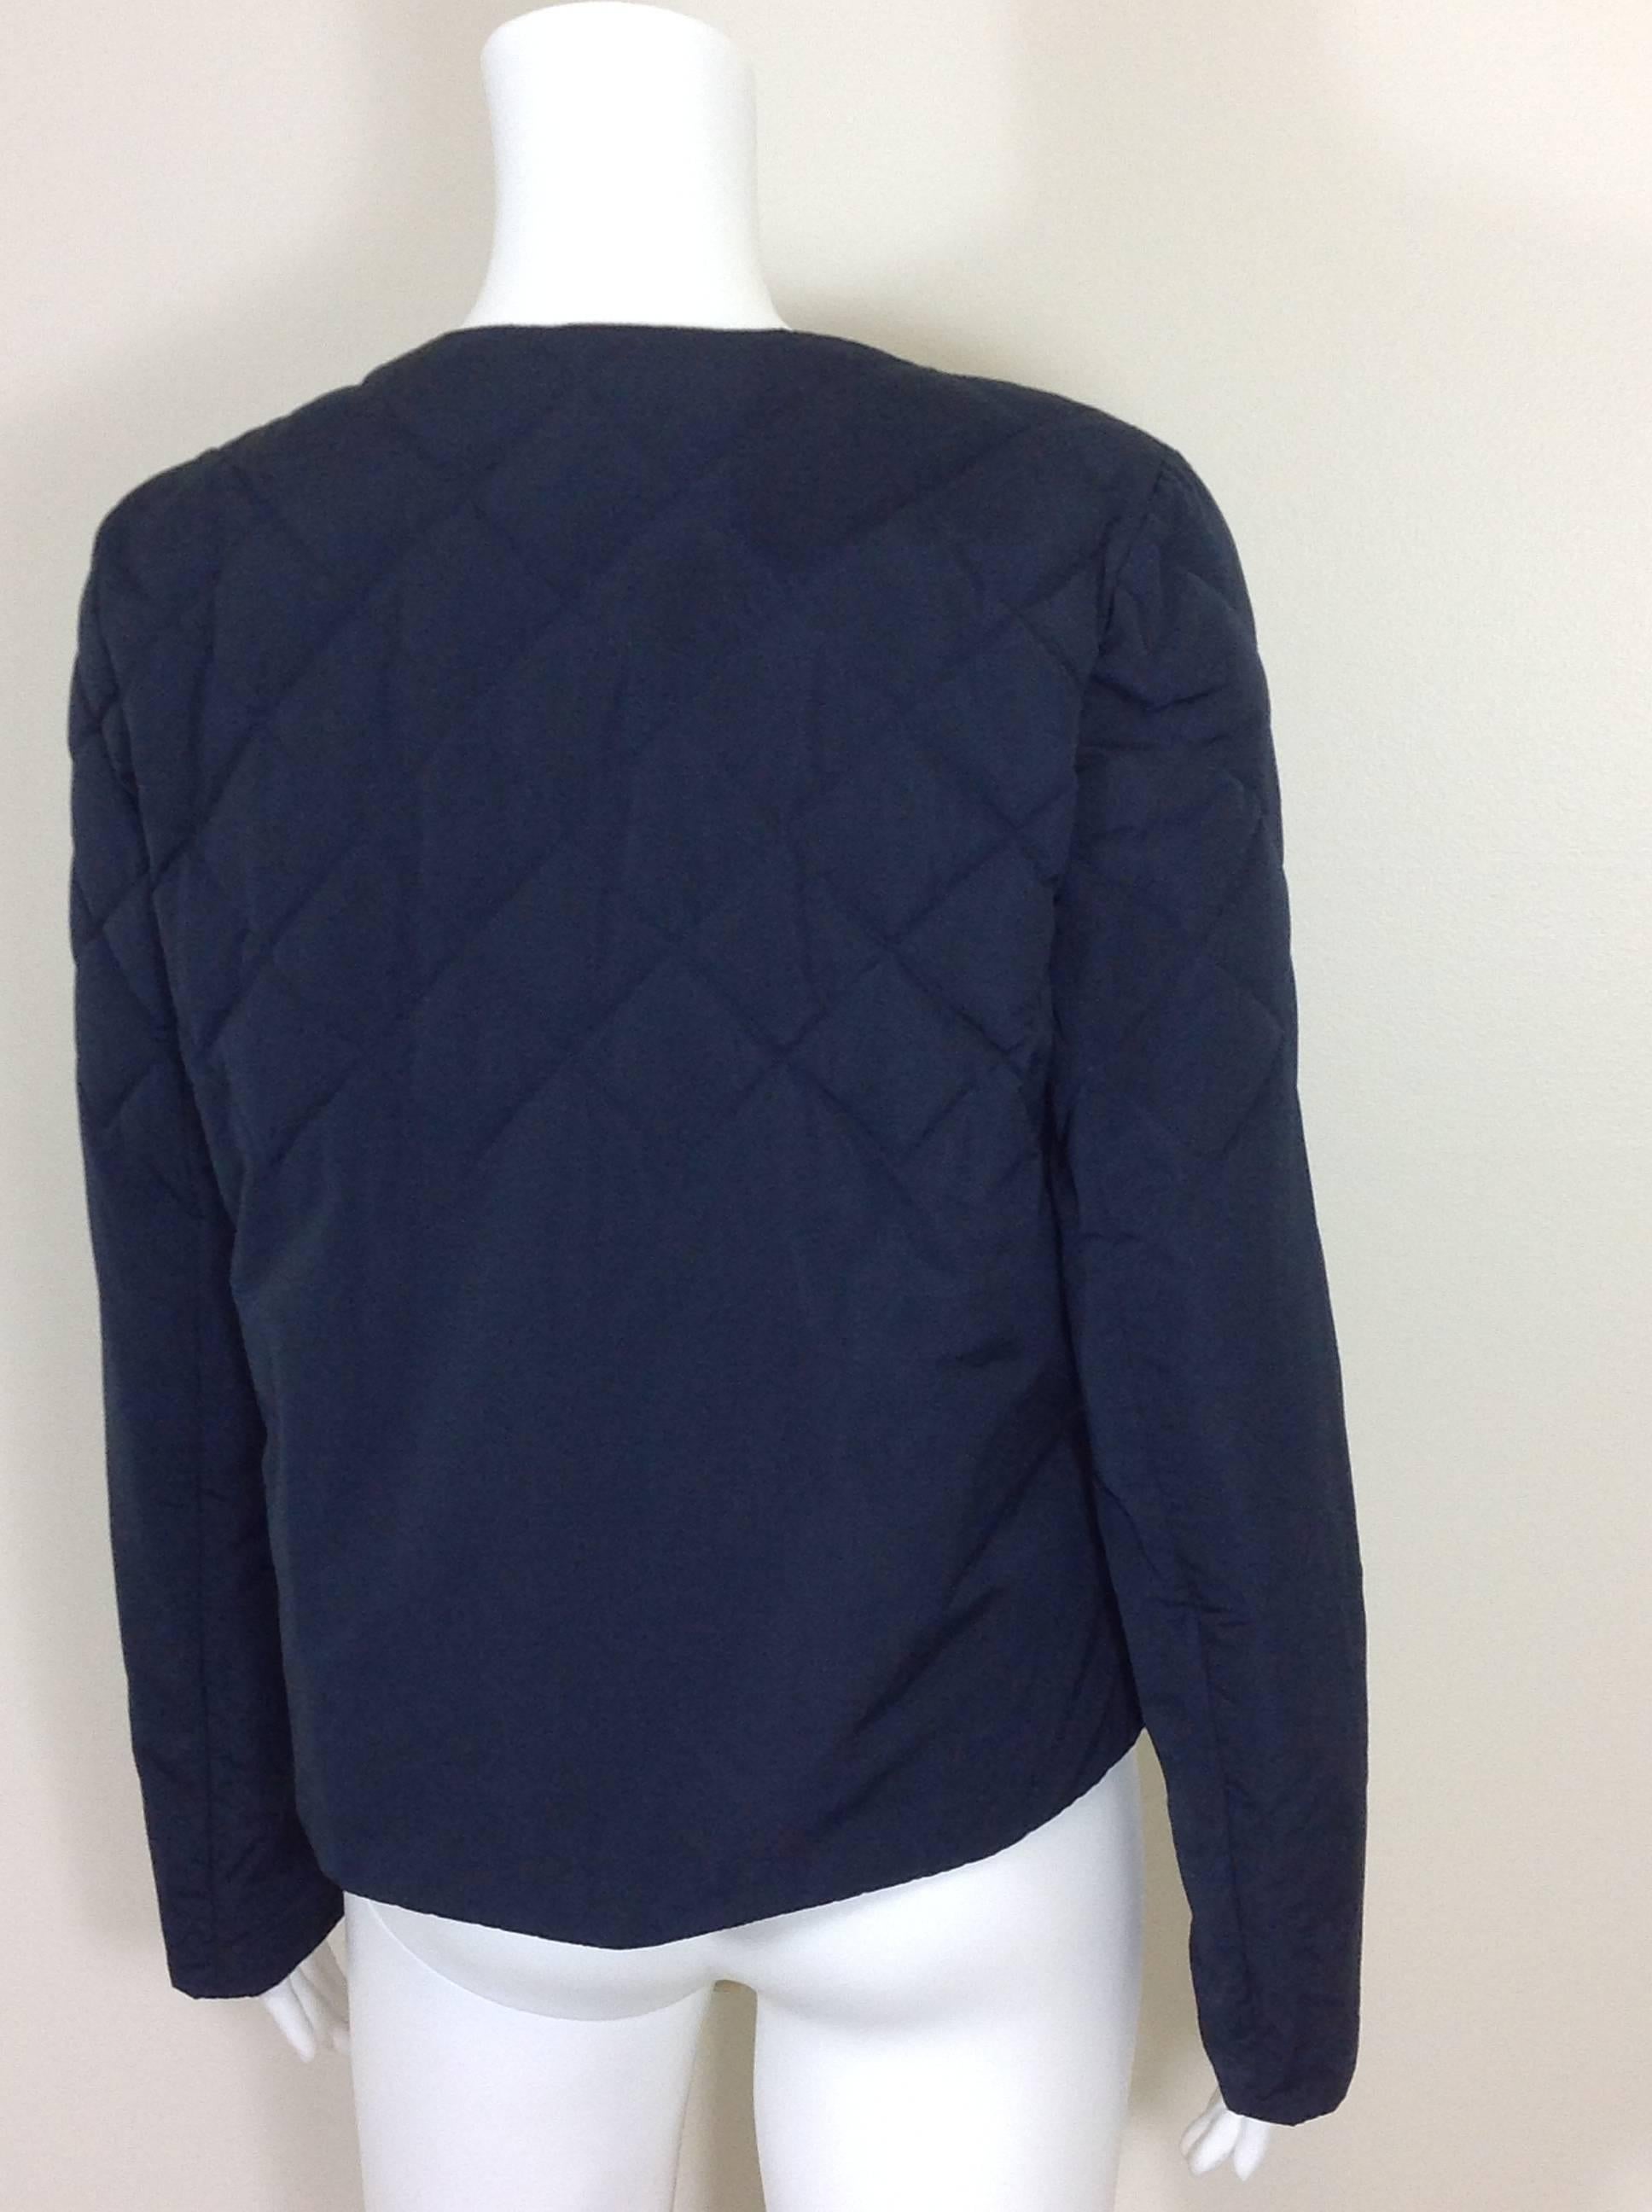 Sophisticated navy diamond quilted Brunello Cucinelli jacket.  Quilted on the top half of the jacket.  18.50